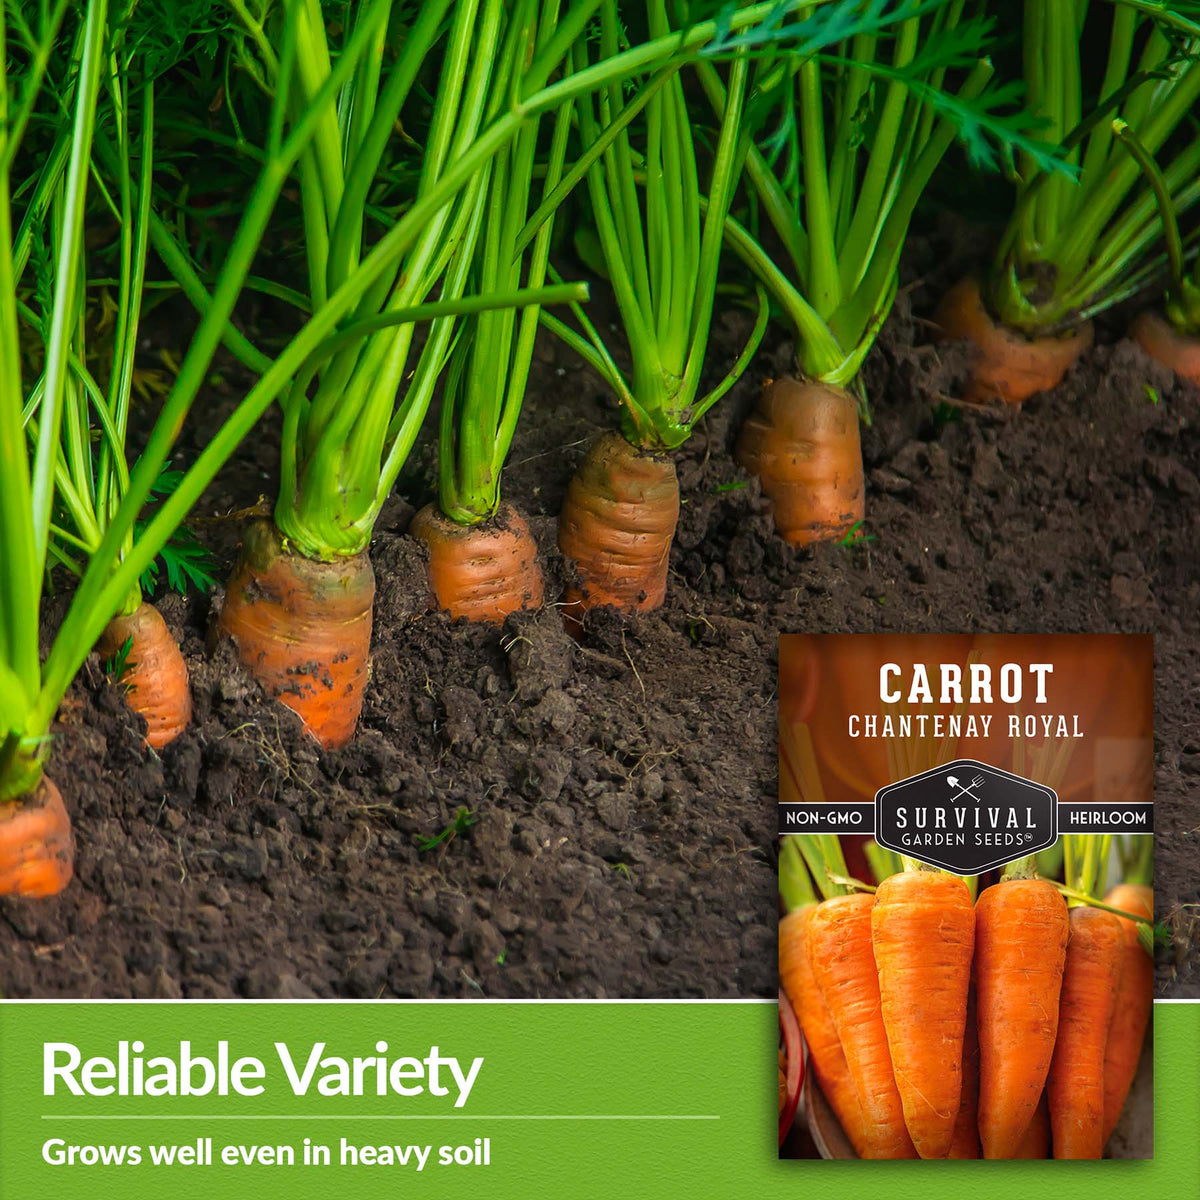 Chantenay Royal Carrots are a reliable variety that grows well even in heavy soil